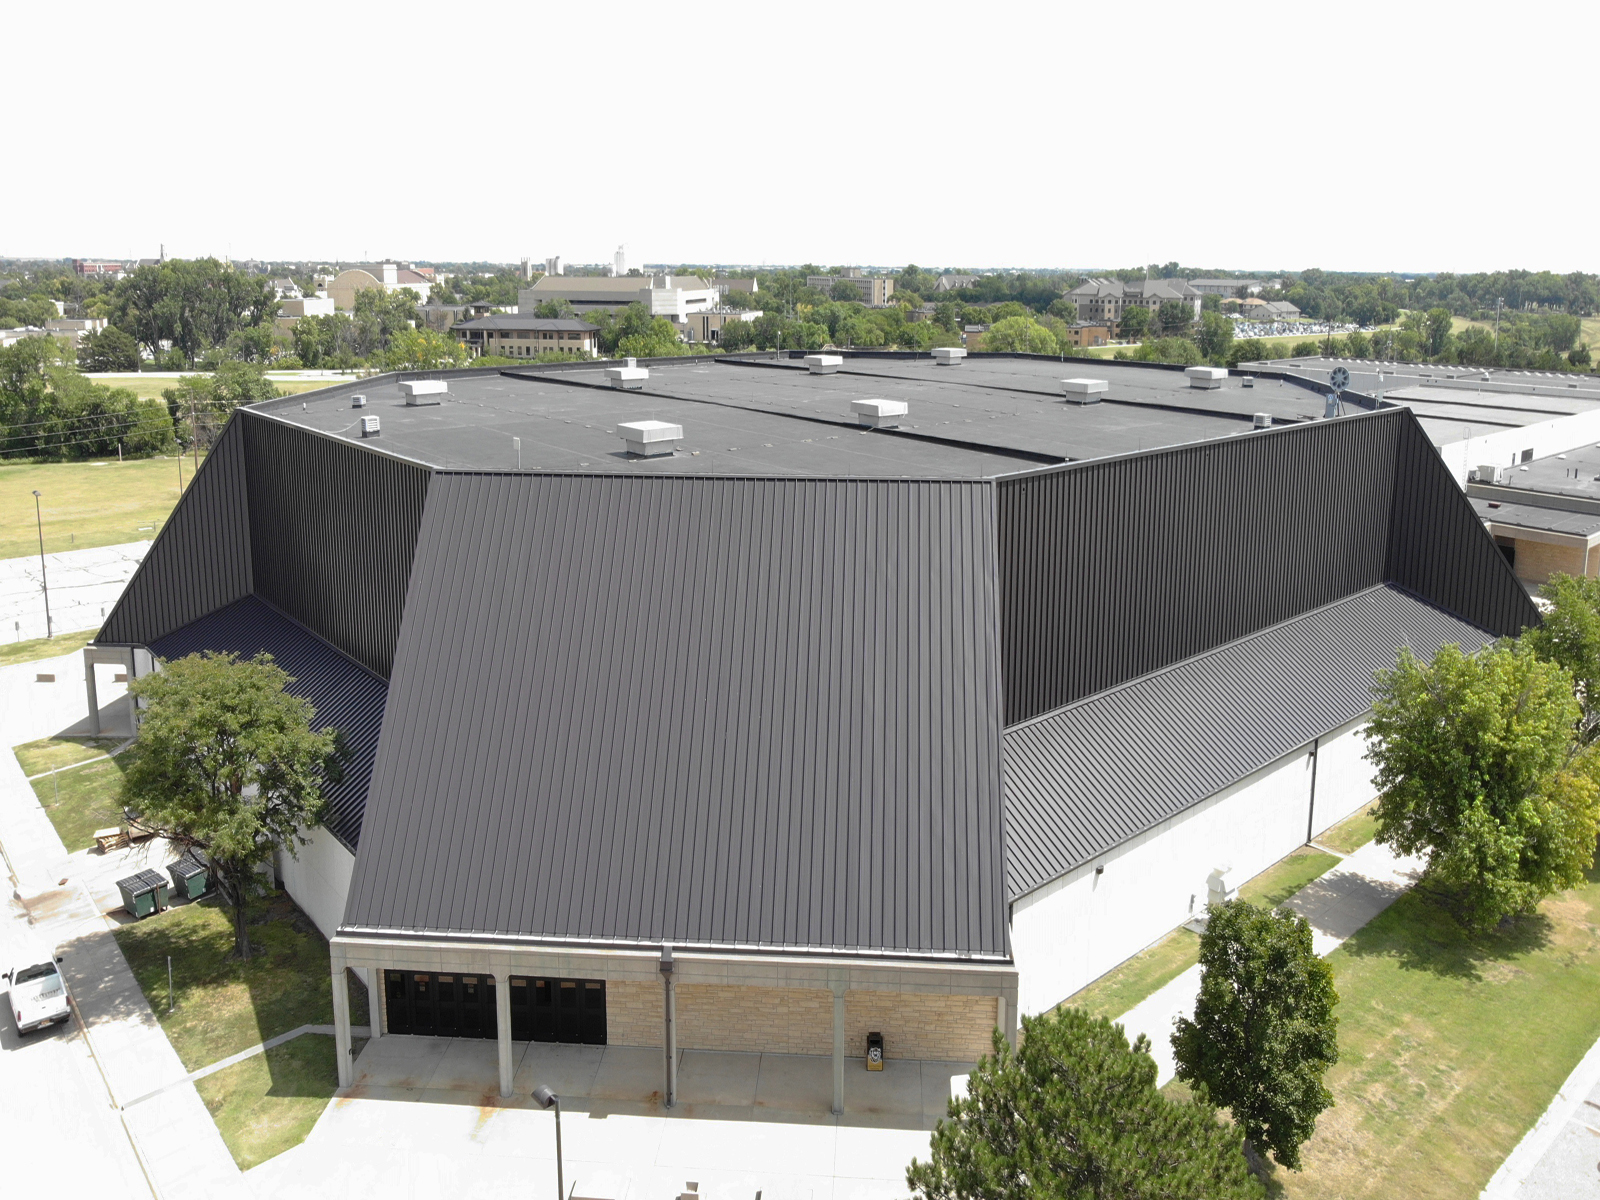 Academic Project uses standing seam panels as vertical wall